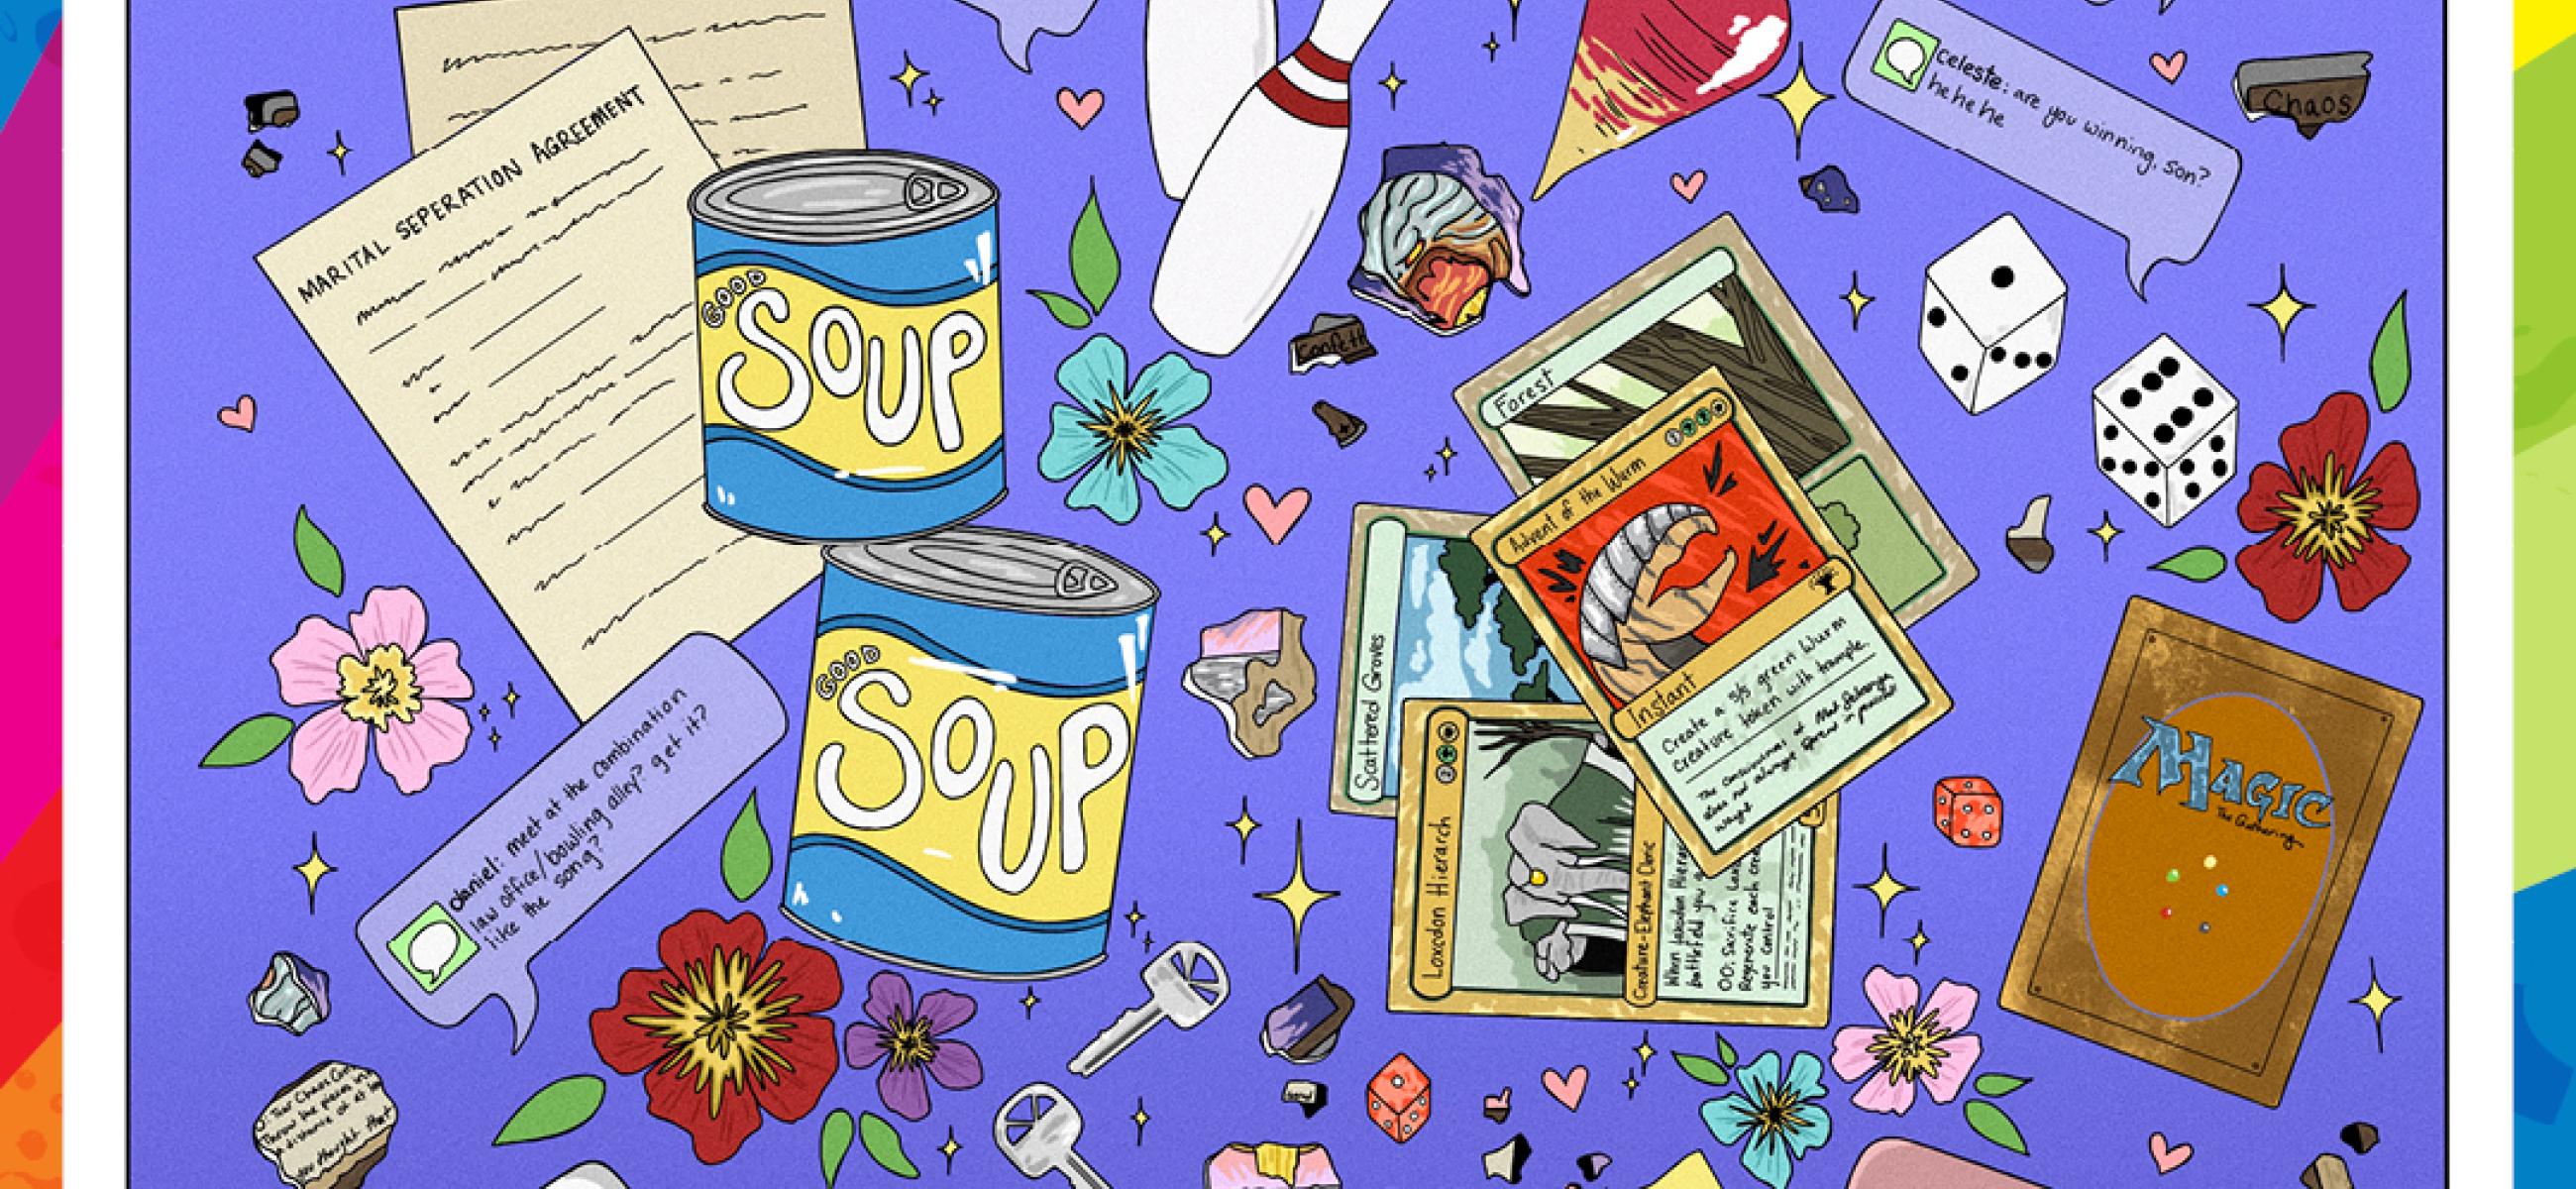 Rainbow border surrounding an illustration of objects: playing cards, flowers, soup cans, legal documents, dice, keys, bowling pins, and phones